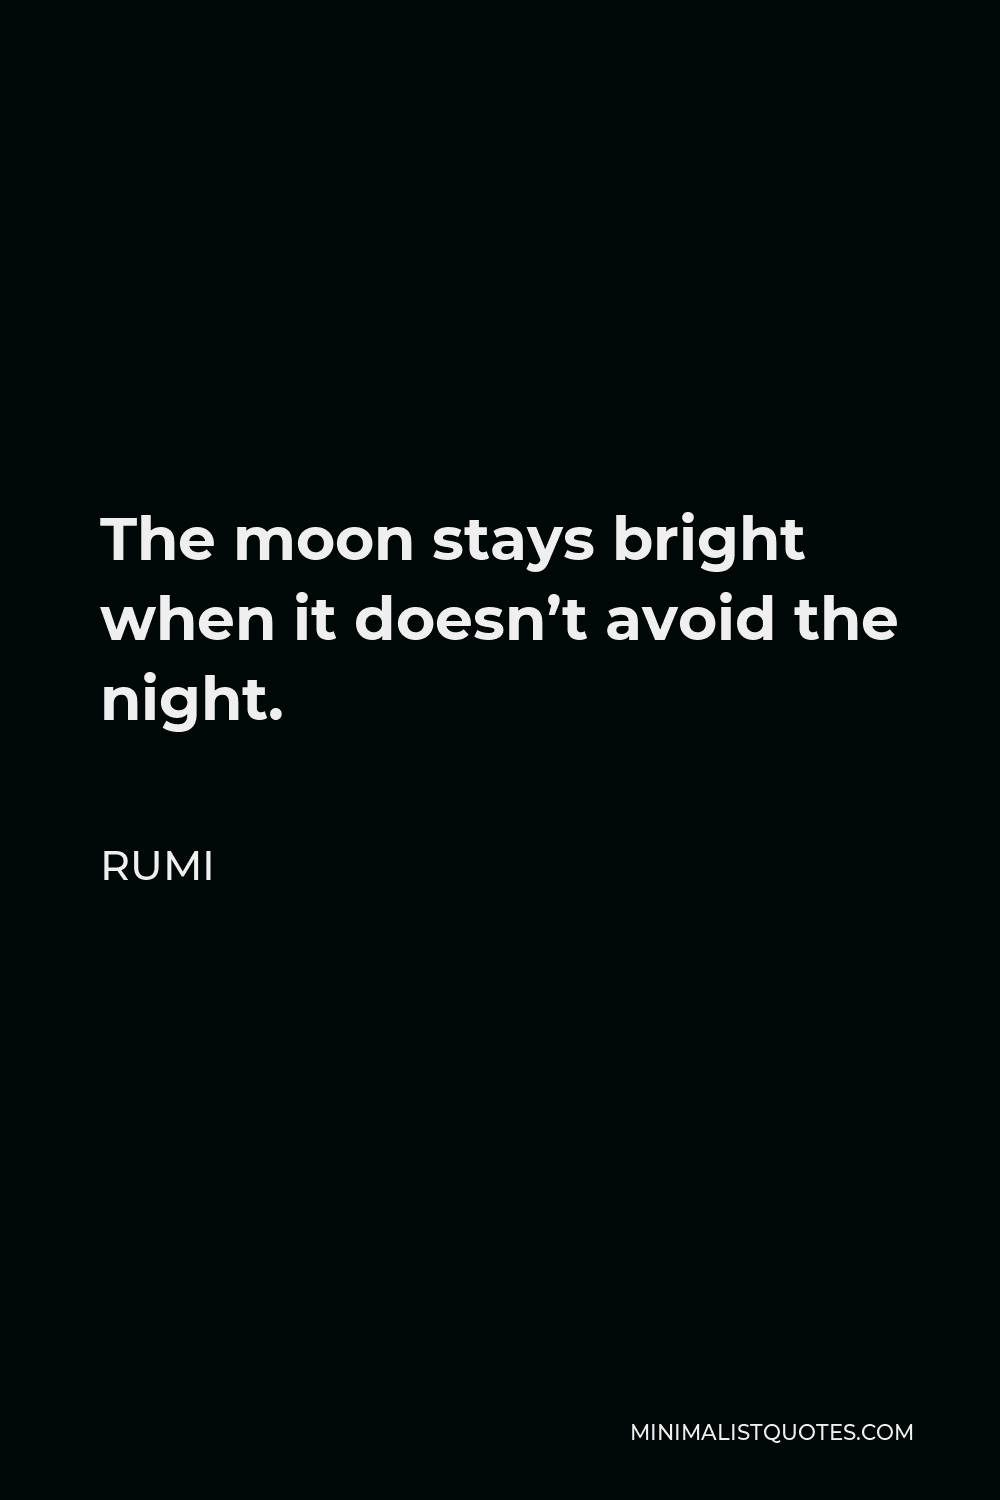 Rumi Quote - The moon stays bright when it doesn’t avoid the night.